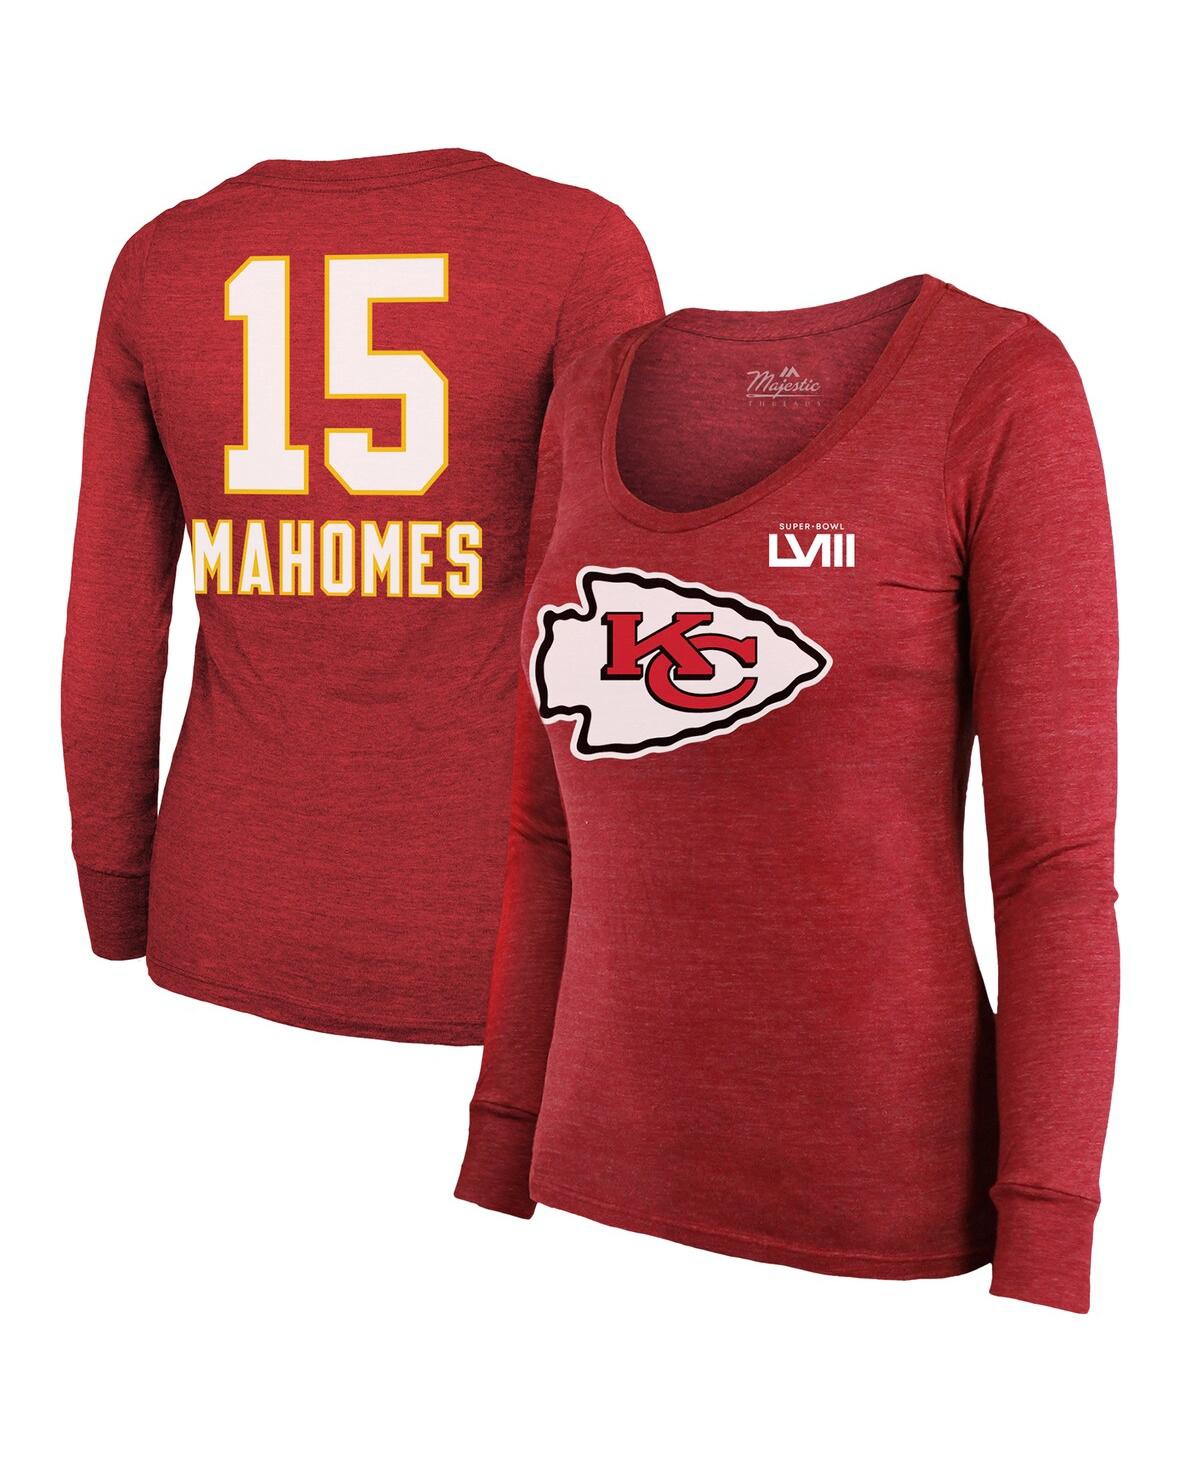 Women's Majestic Threads Patrick Mahomes Red Kansas City Chiefs Super Bowl Lviii Scoop Name and Number Tri-Blend Long Sleeve T-shirt - Red